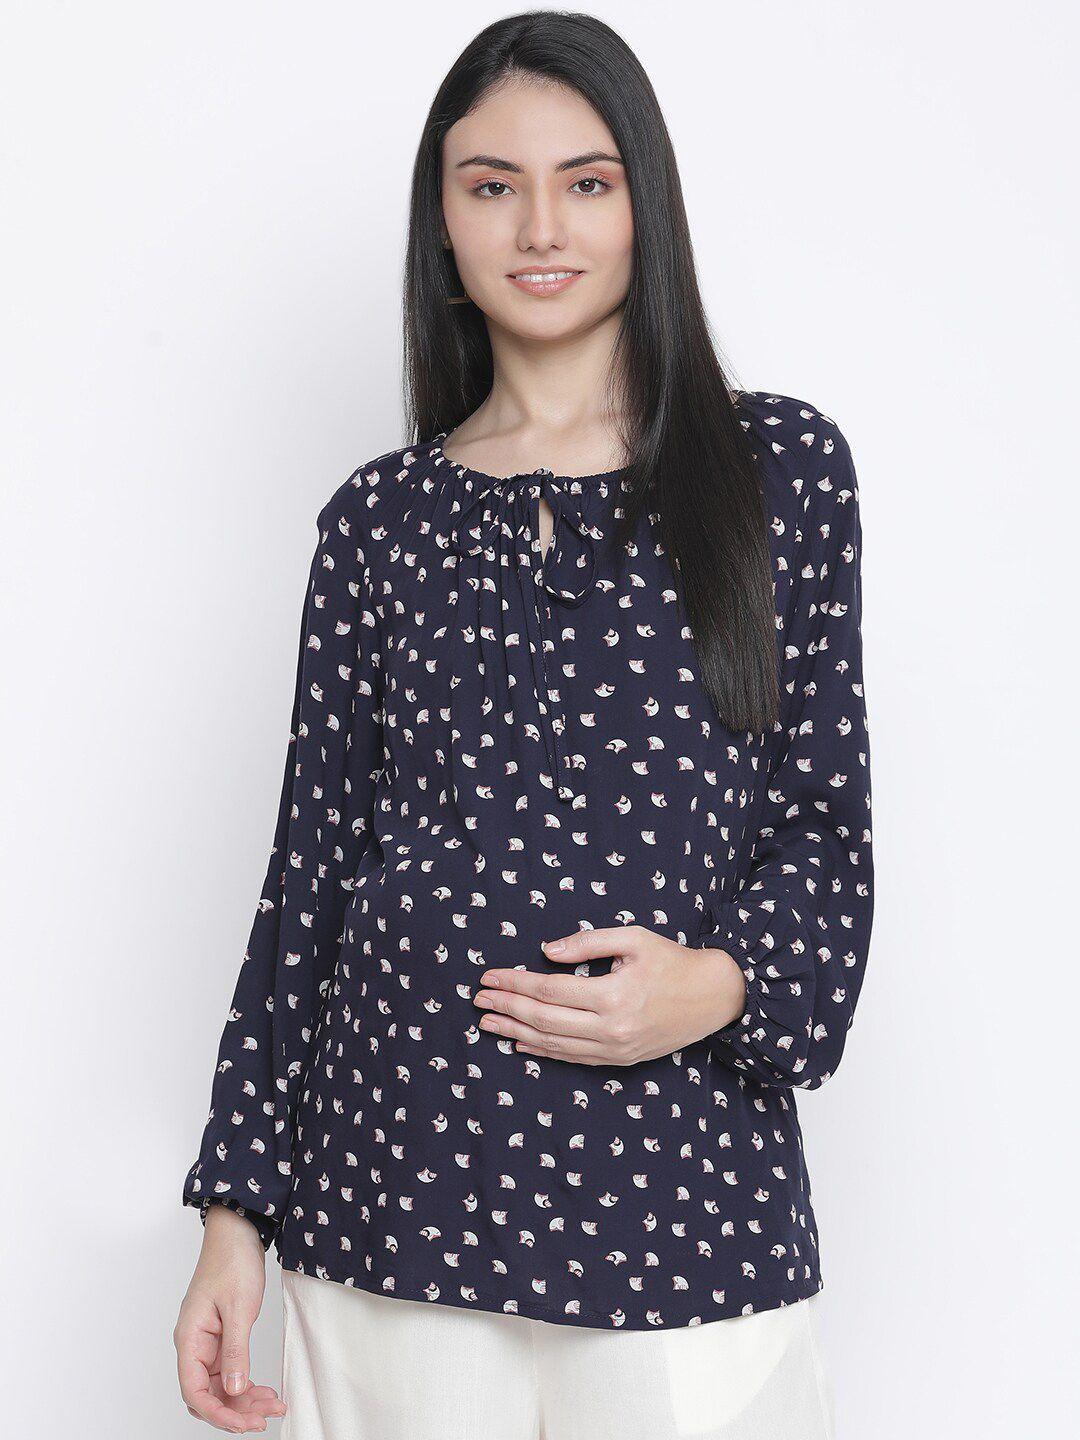 oxolloxo woman navy blue print tie-up neck maternity top